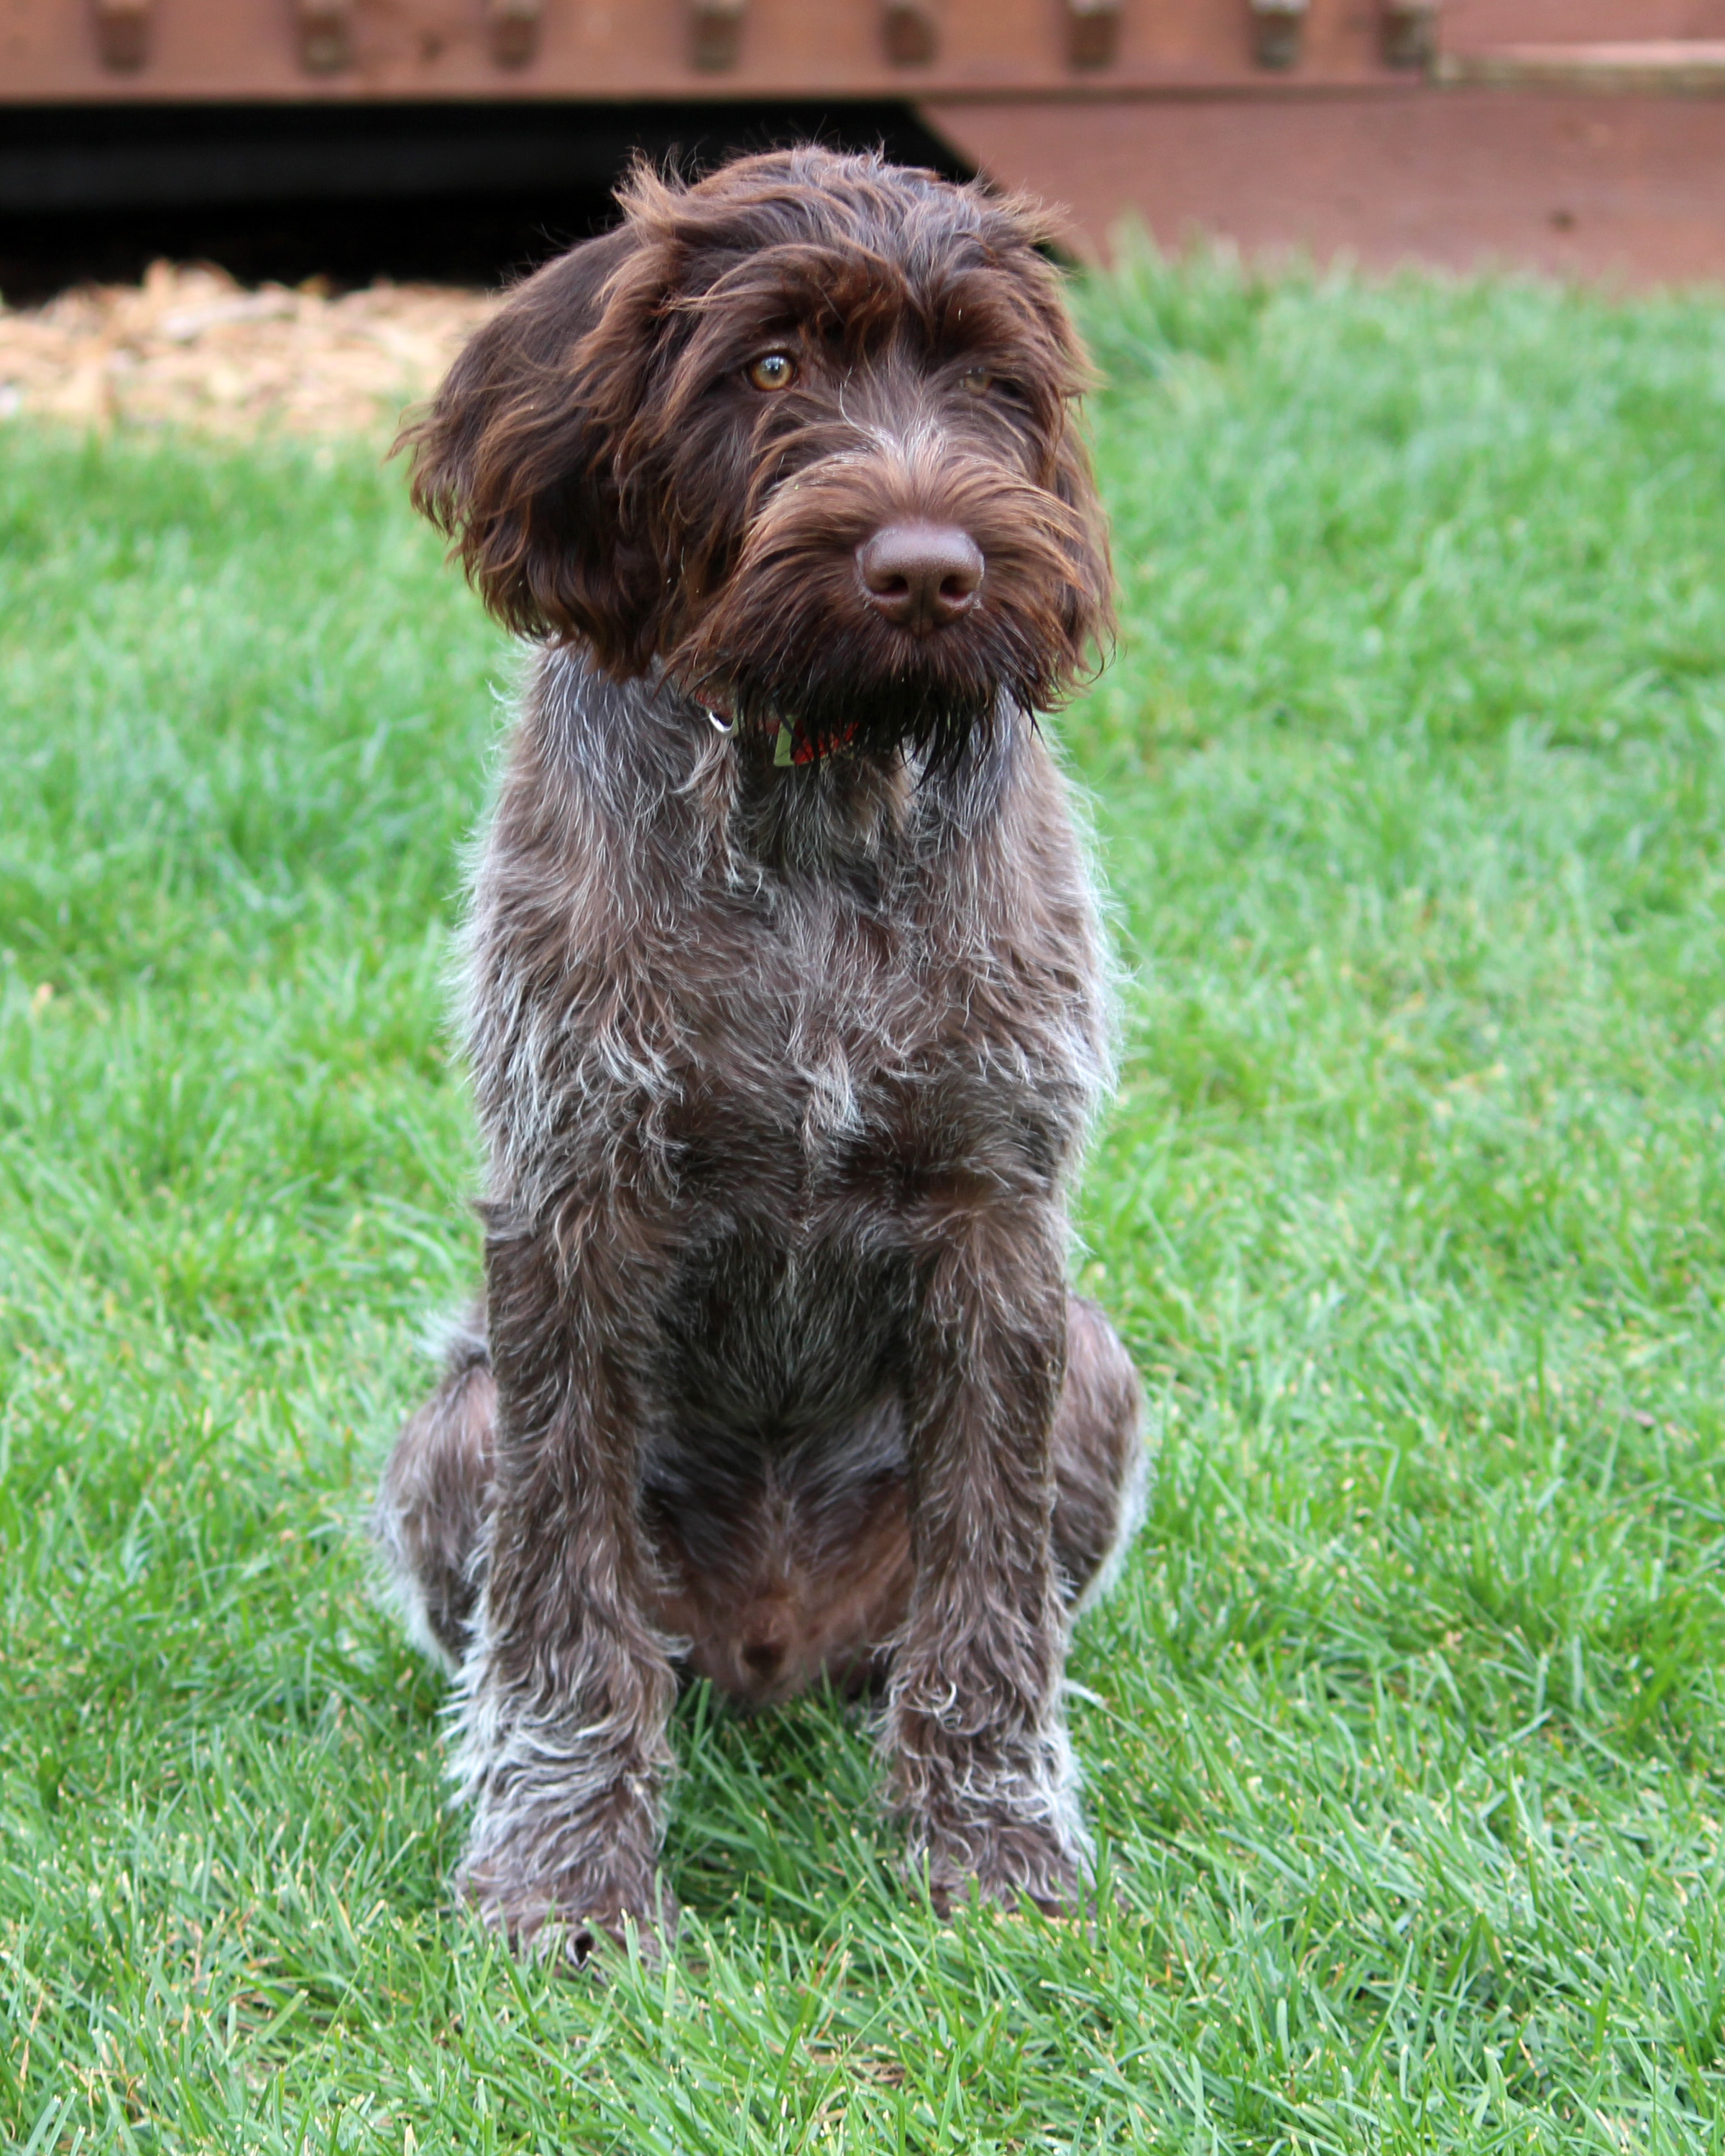 Slovakian Rough-haired Pointer Puppies: Slovakian Sitting German Wirehaired Pointer Dog Breed